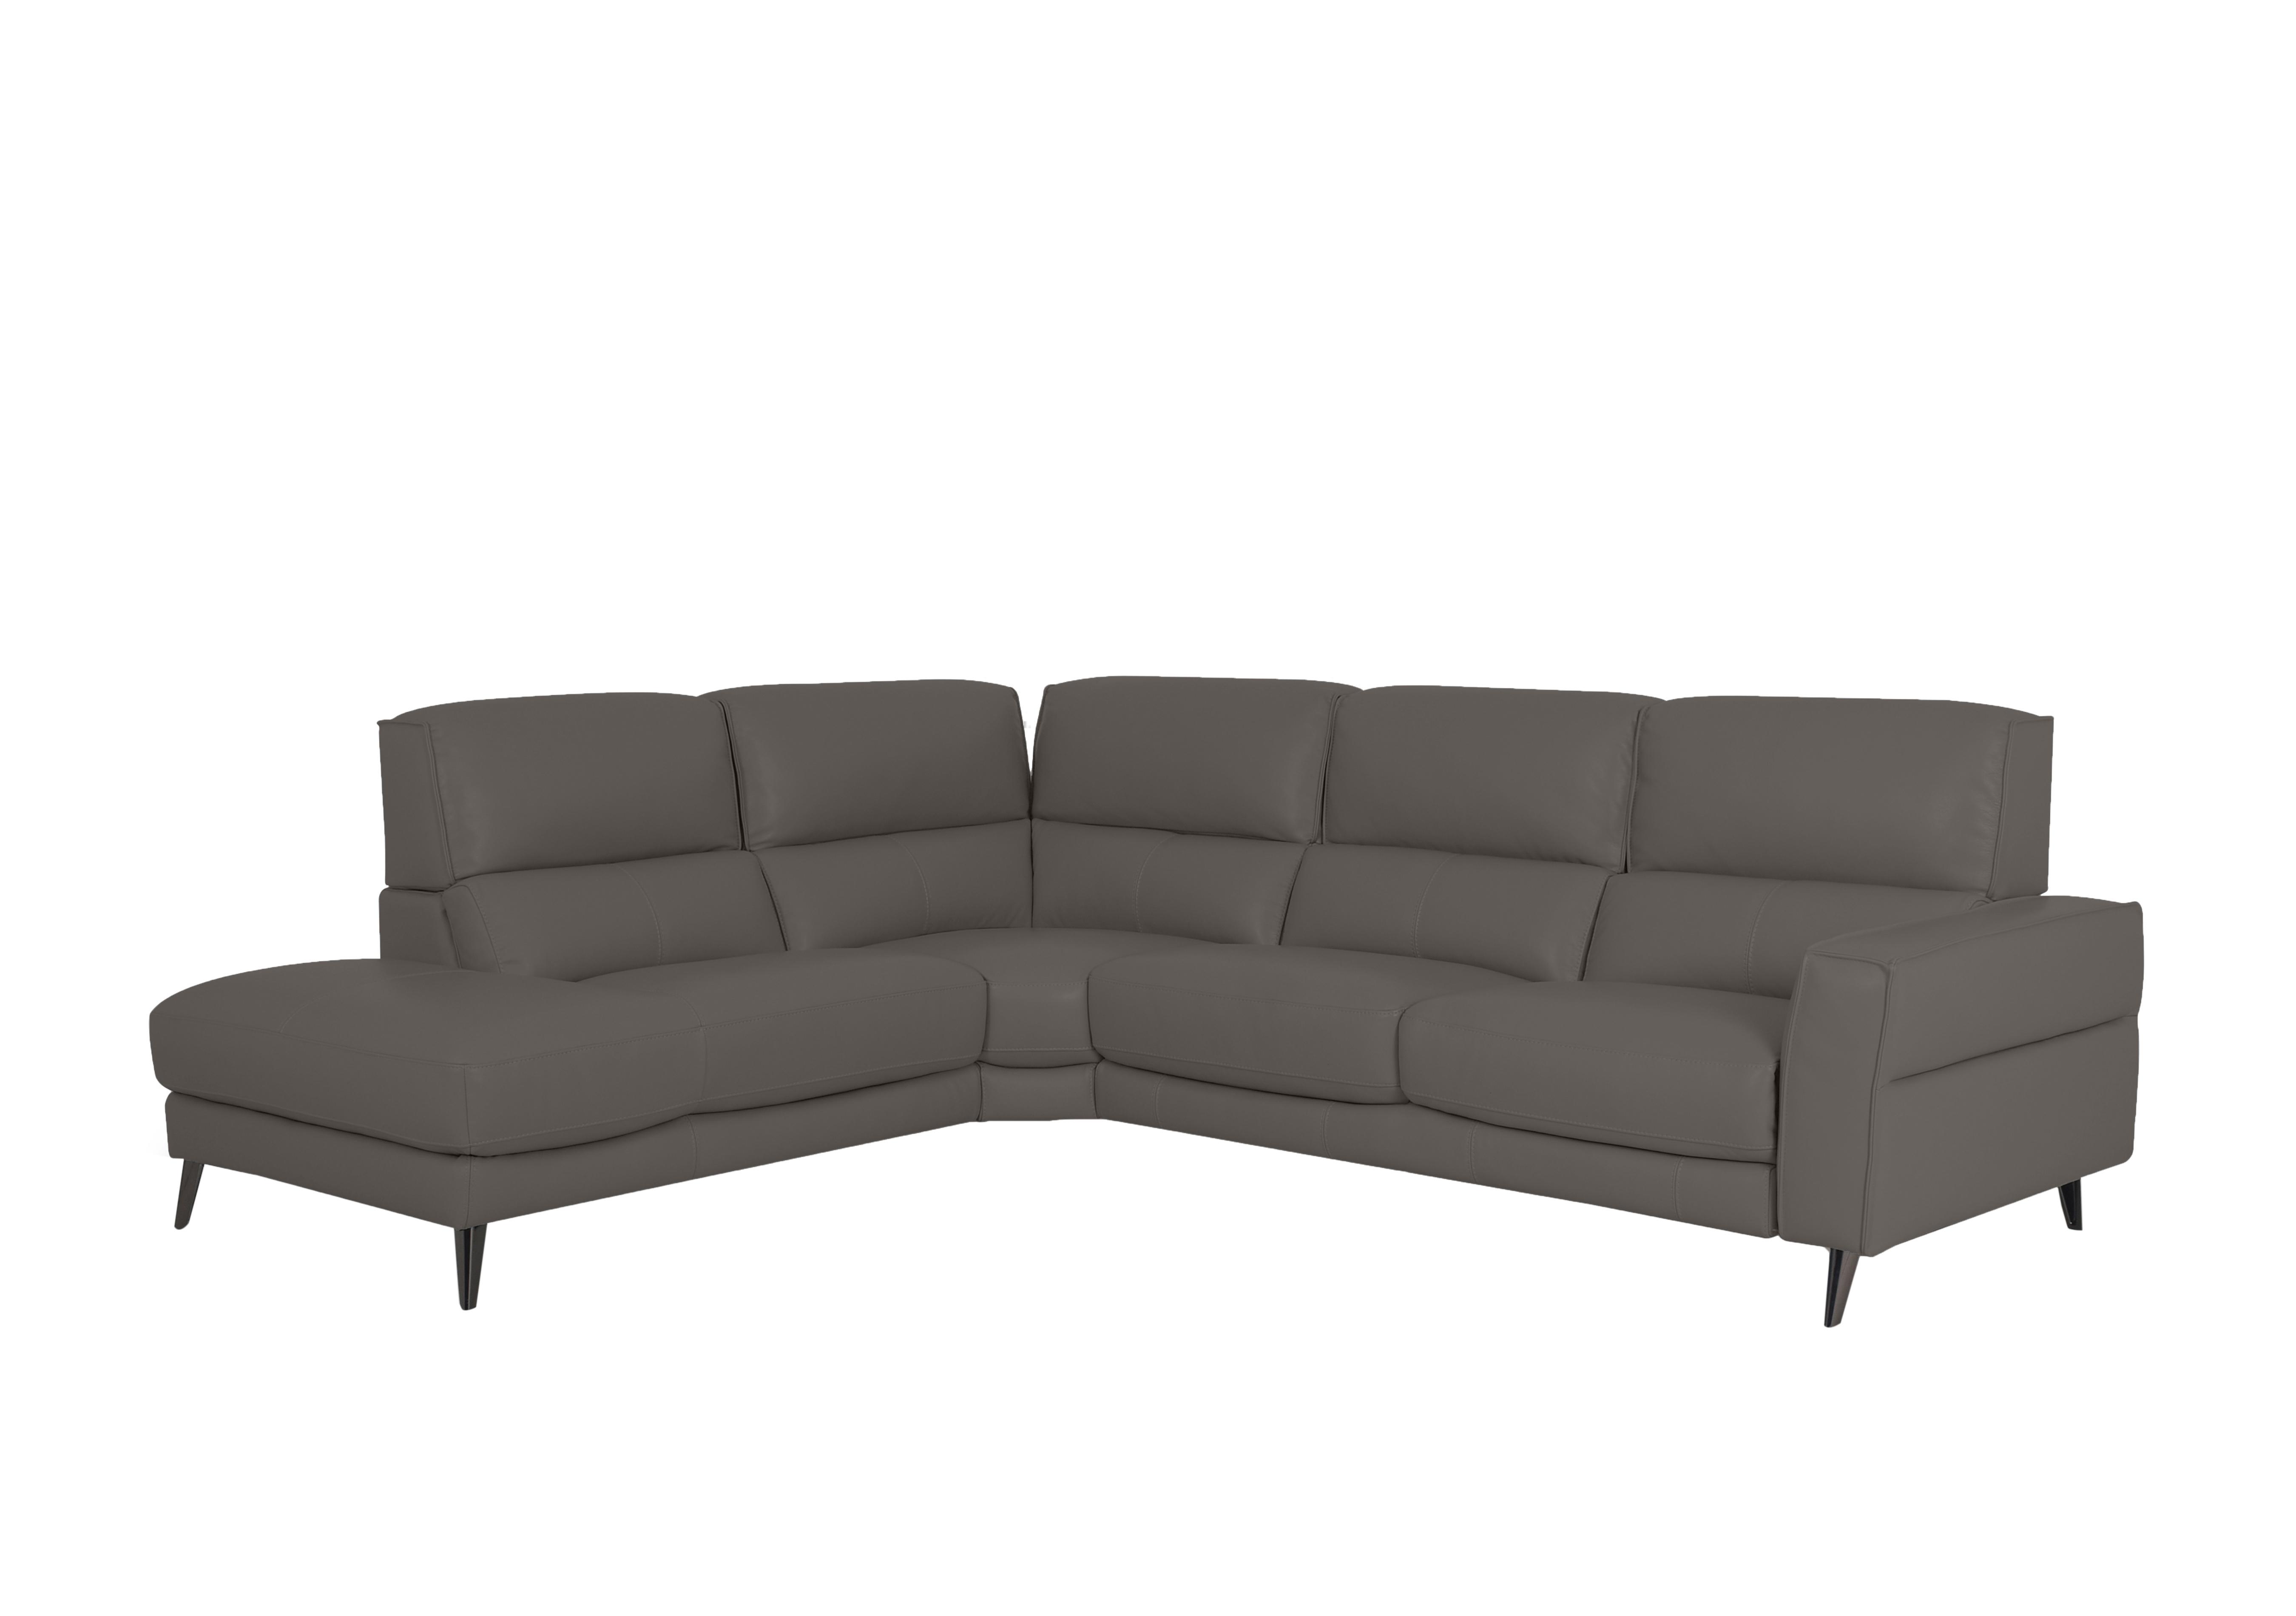 Axel Leather Chaise End Sofa in Bv-042e Elephant on Furniture Village